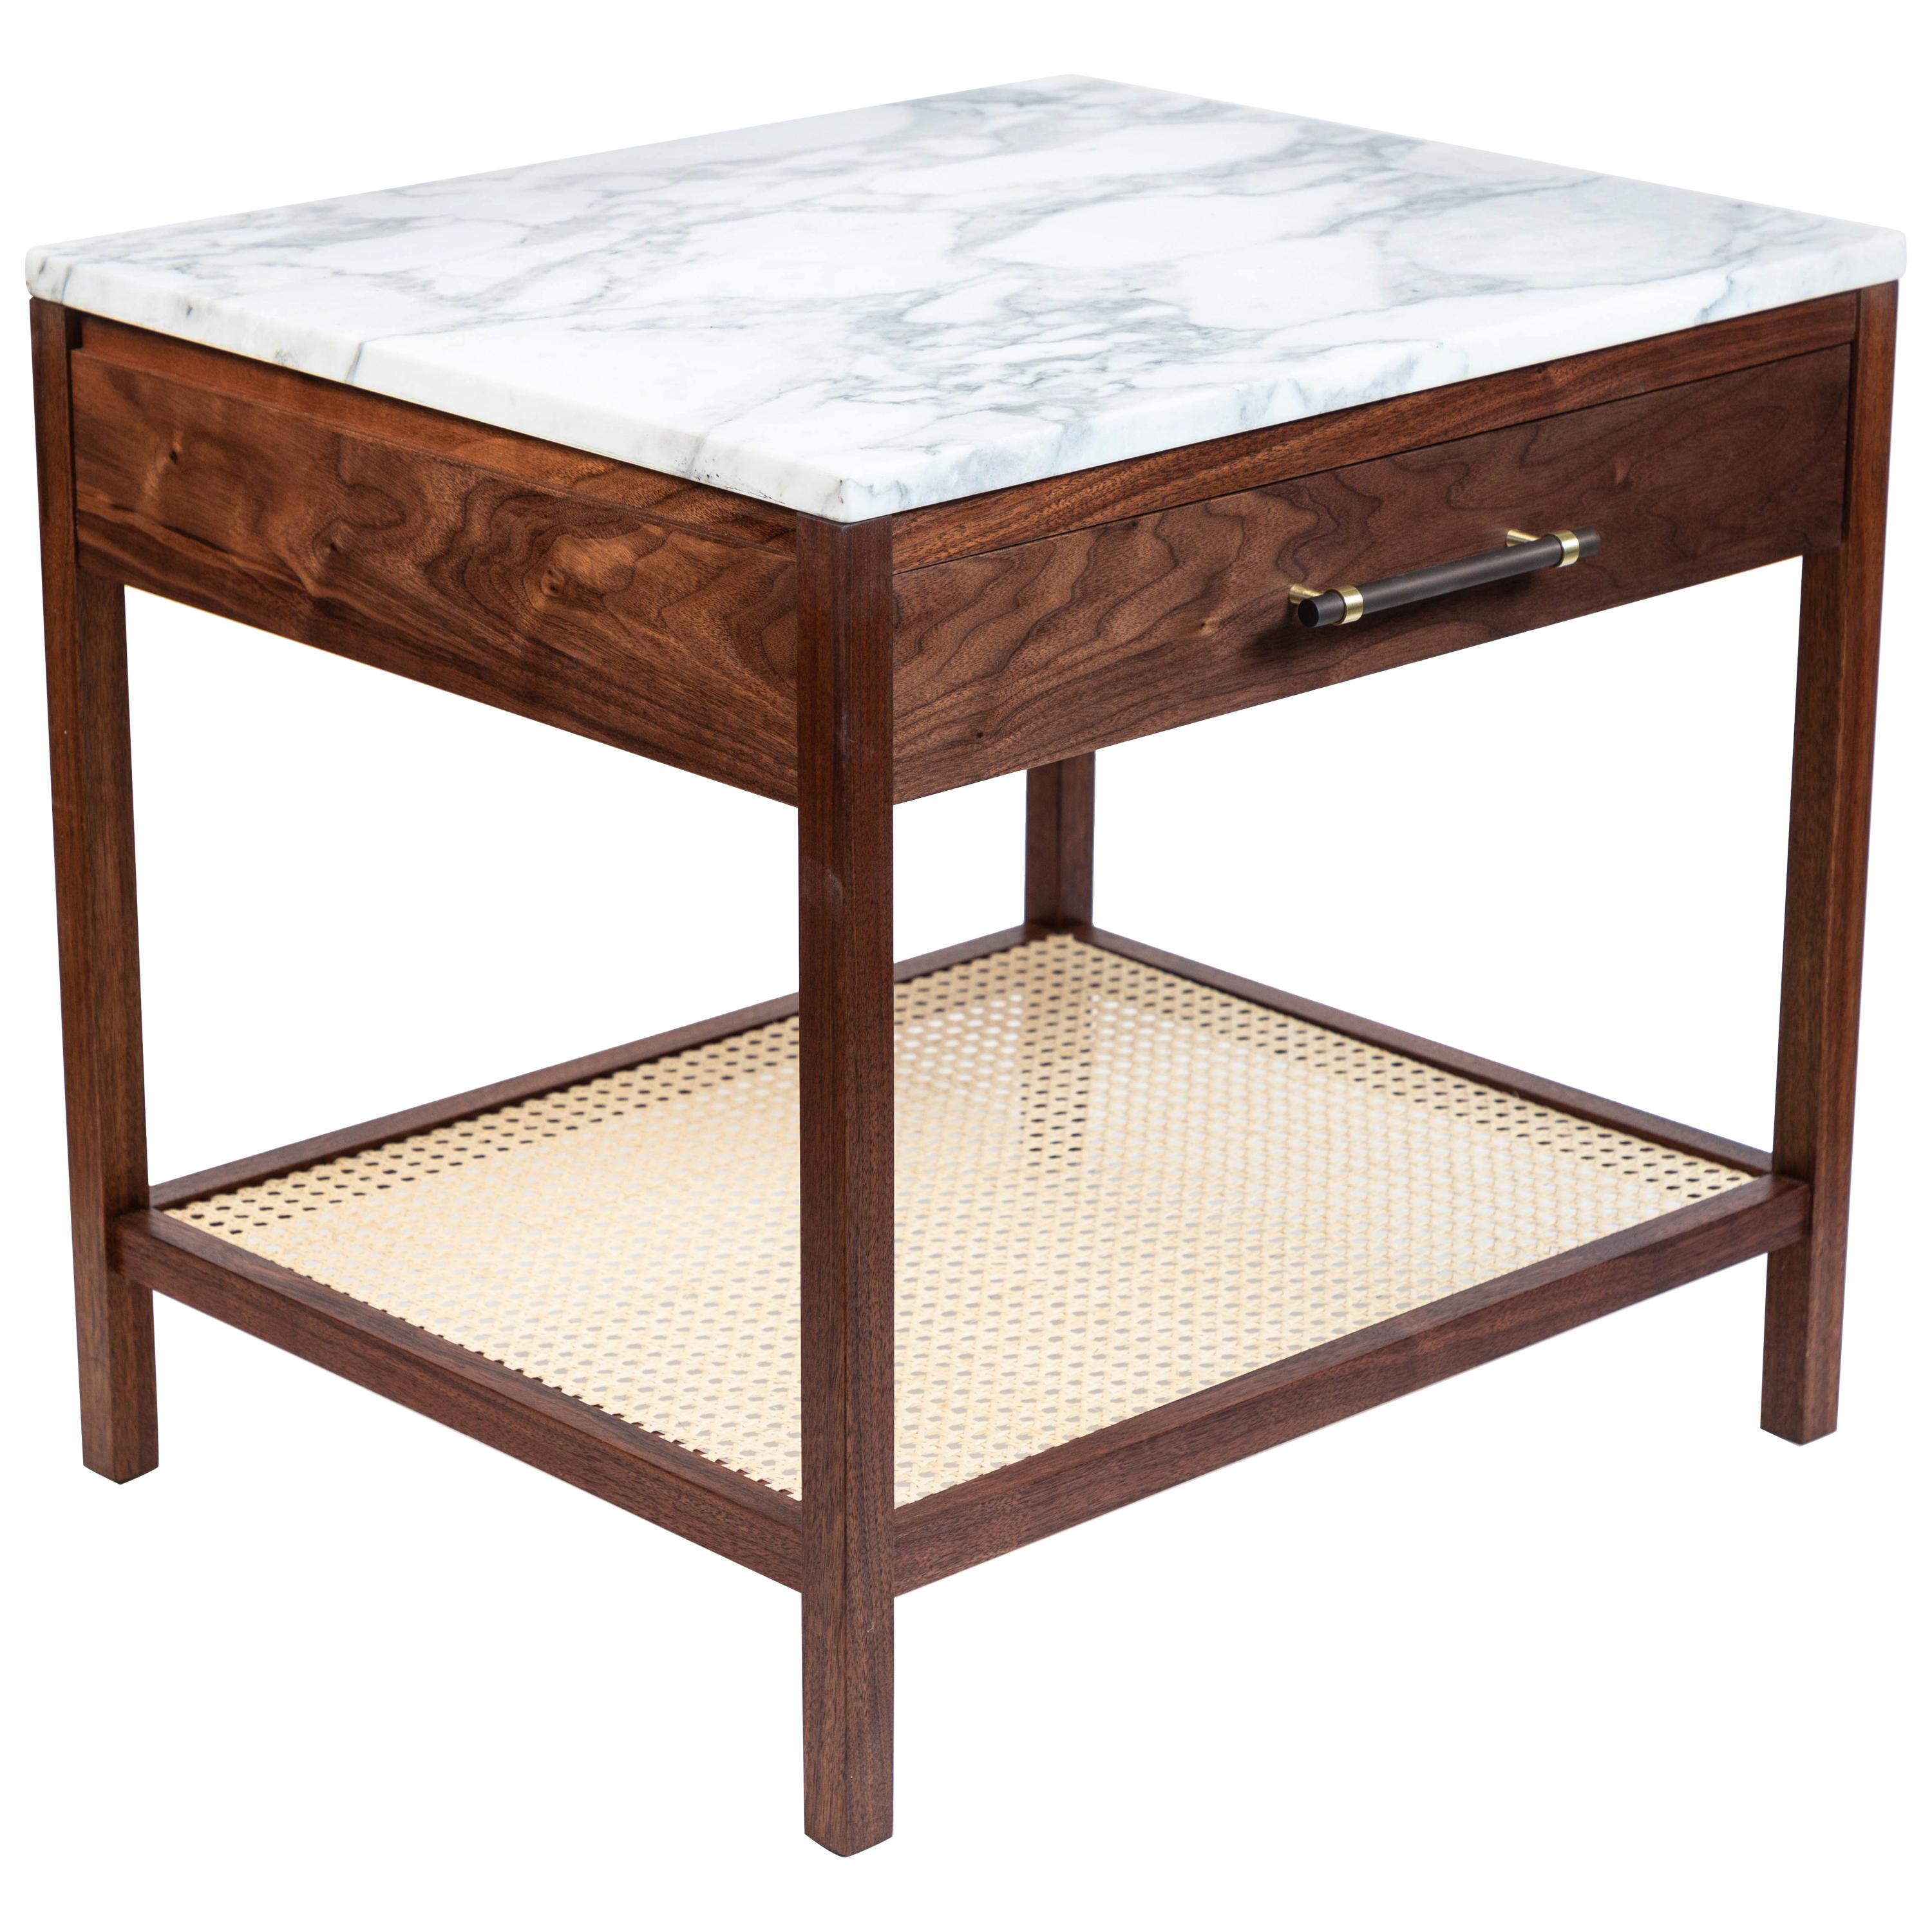 Custom-Made Walnut End Table with a Marble Top and Caned Bottom Shelf 